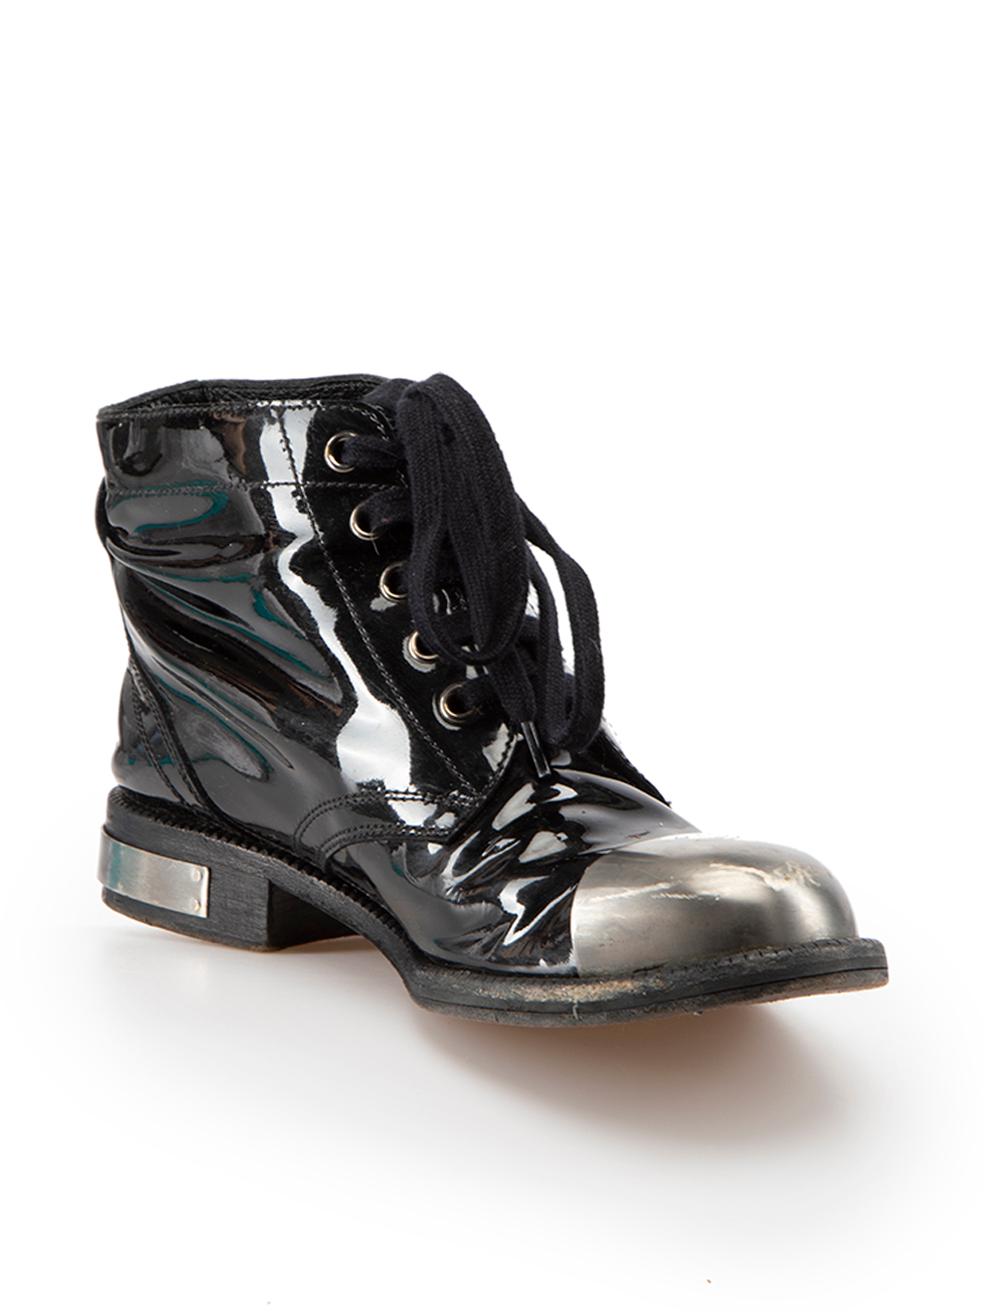 CONDITION is Good. Minor wear to boots is evident. Light wear to the boot uppers, heels and soles with abrasions and creasing to the leather. The metal hardware at the toes and heels are also scratched on this used Chanel designer resale item. These